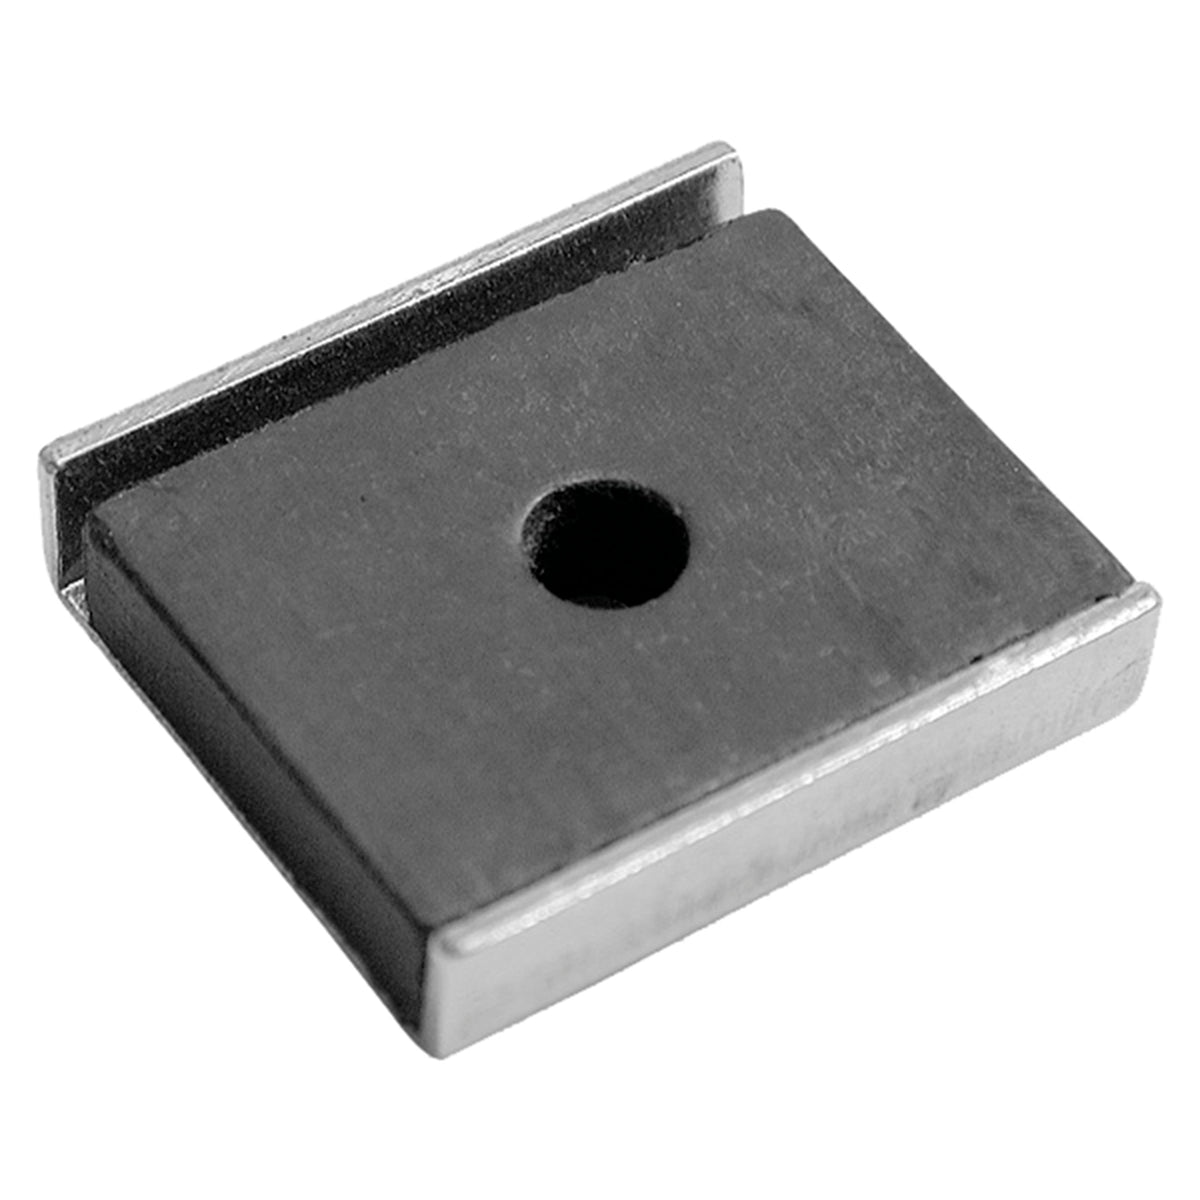 Rubber Latch Magnet Channel Assembly